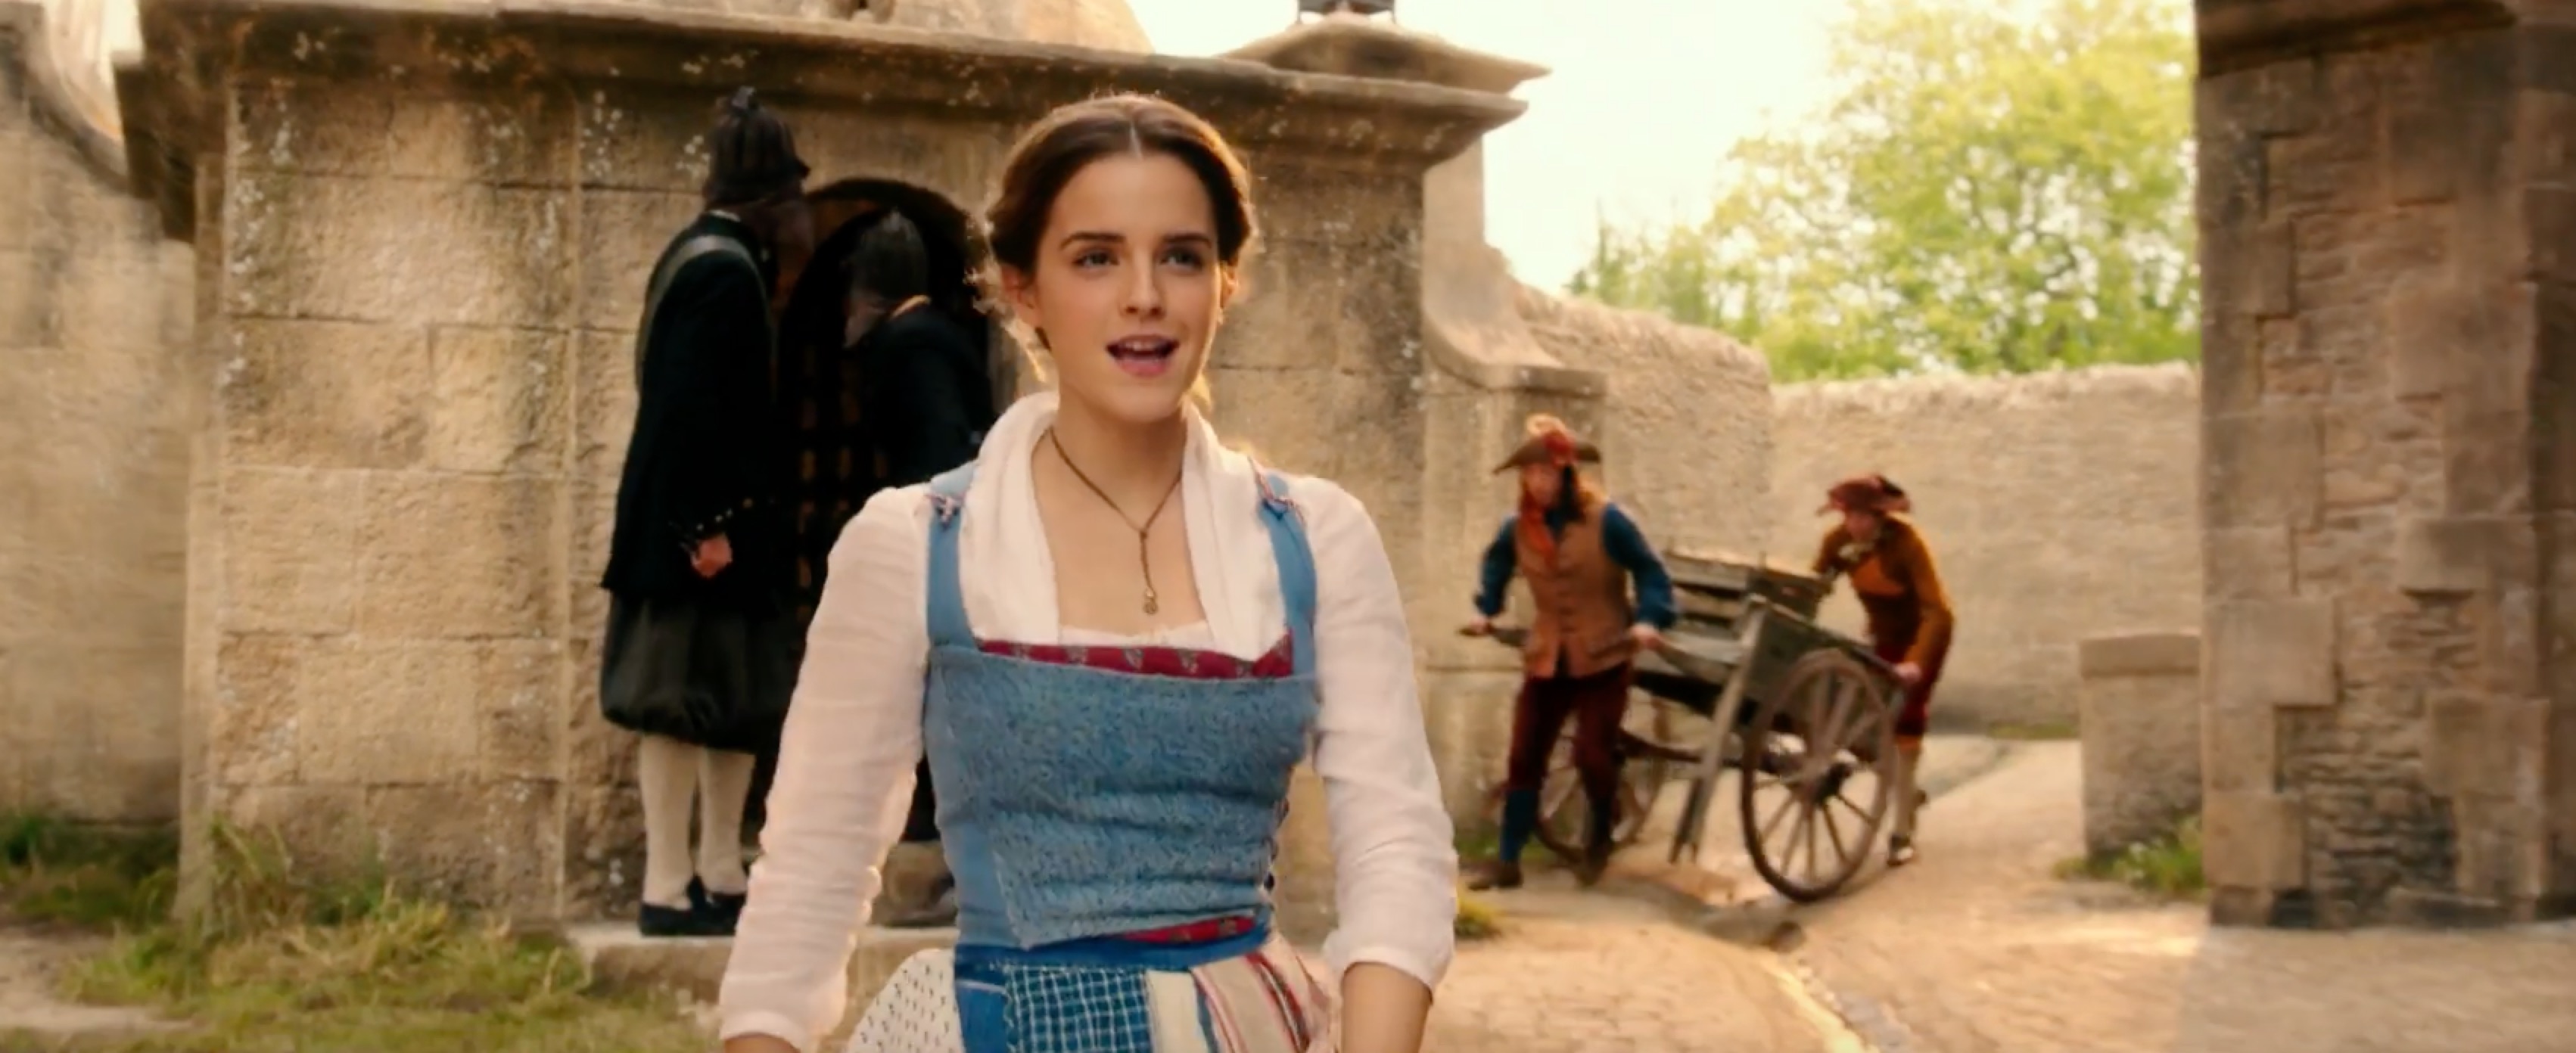 Beauty and the Beast Belle Song Revealed In Clip